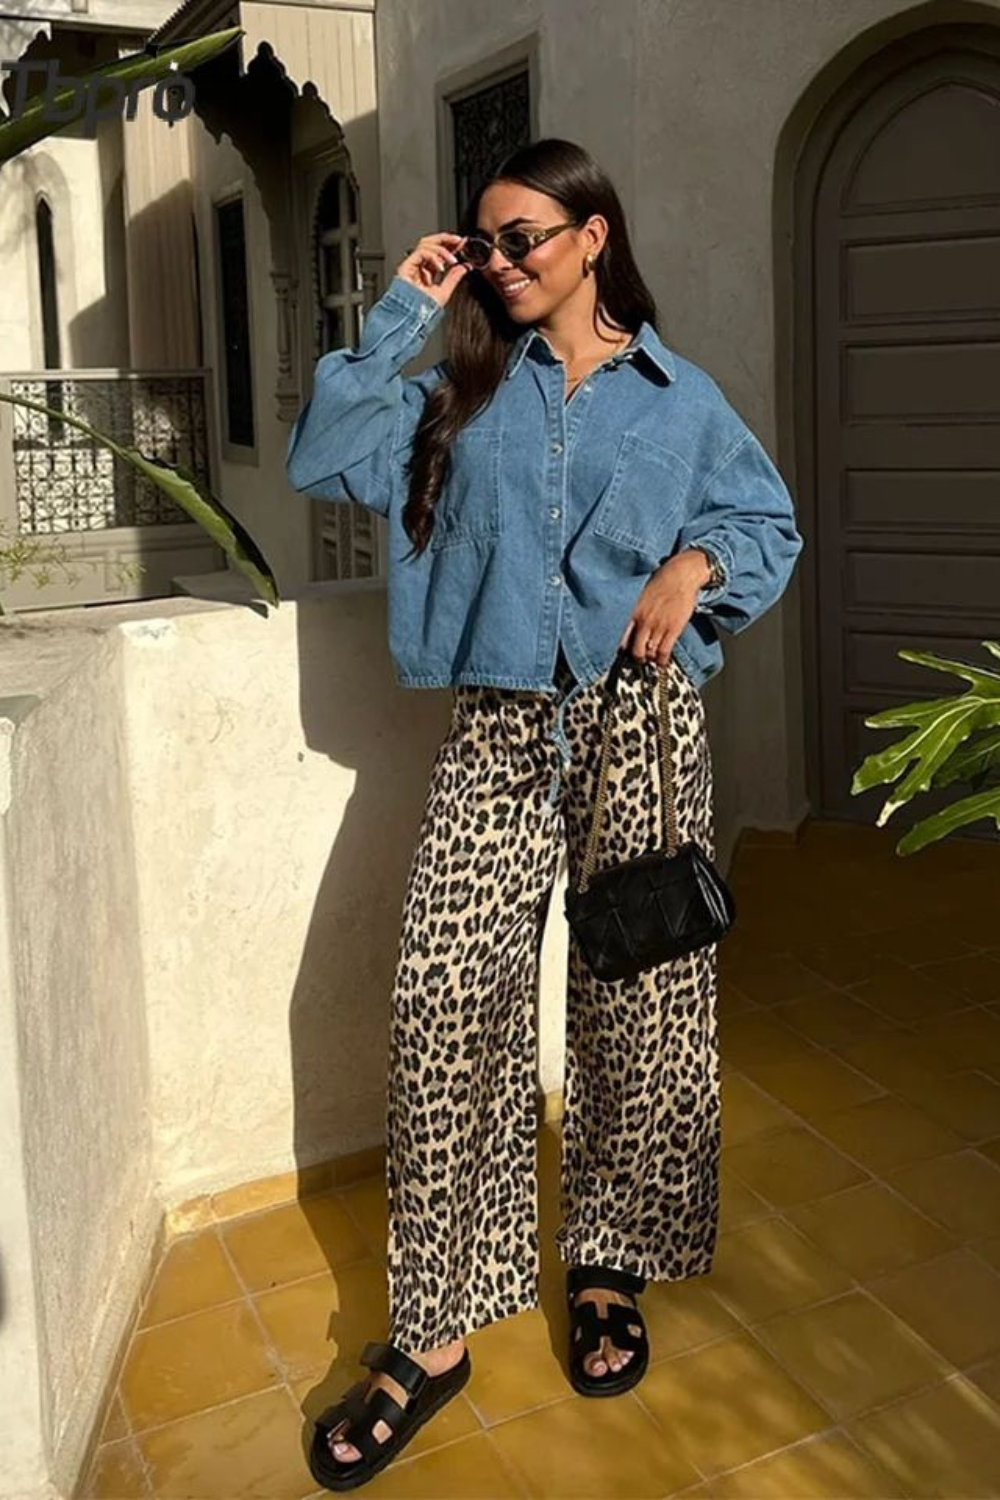 How To Style Leopard Print? These Outfits Are All The Hype!